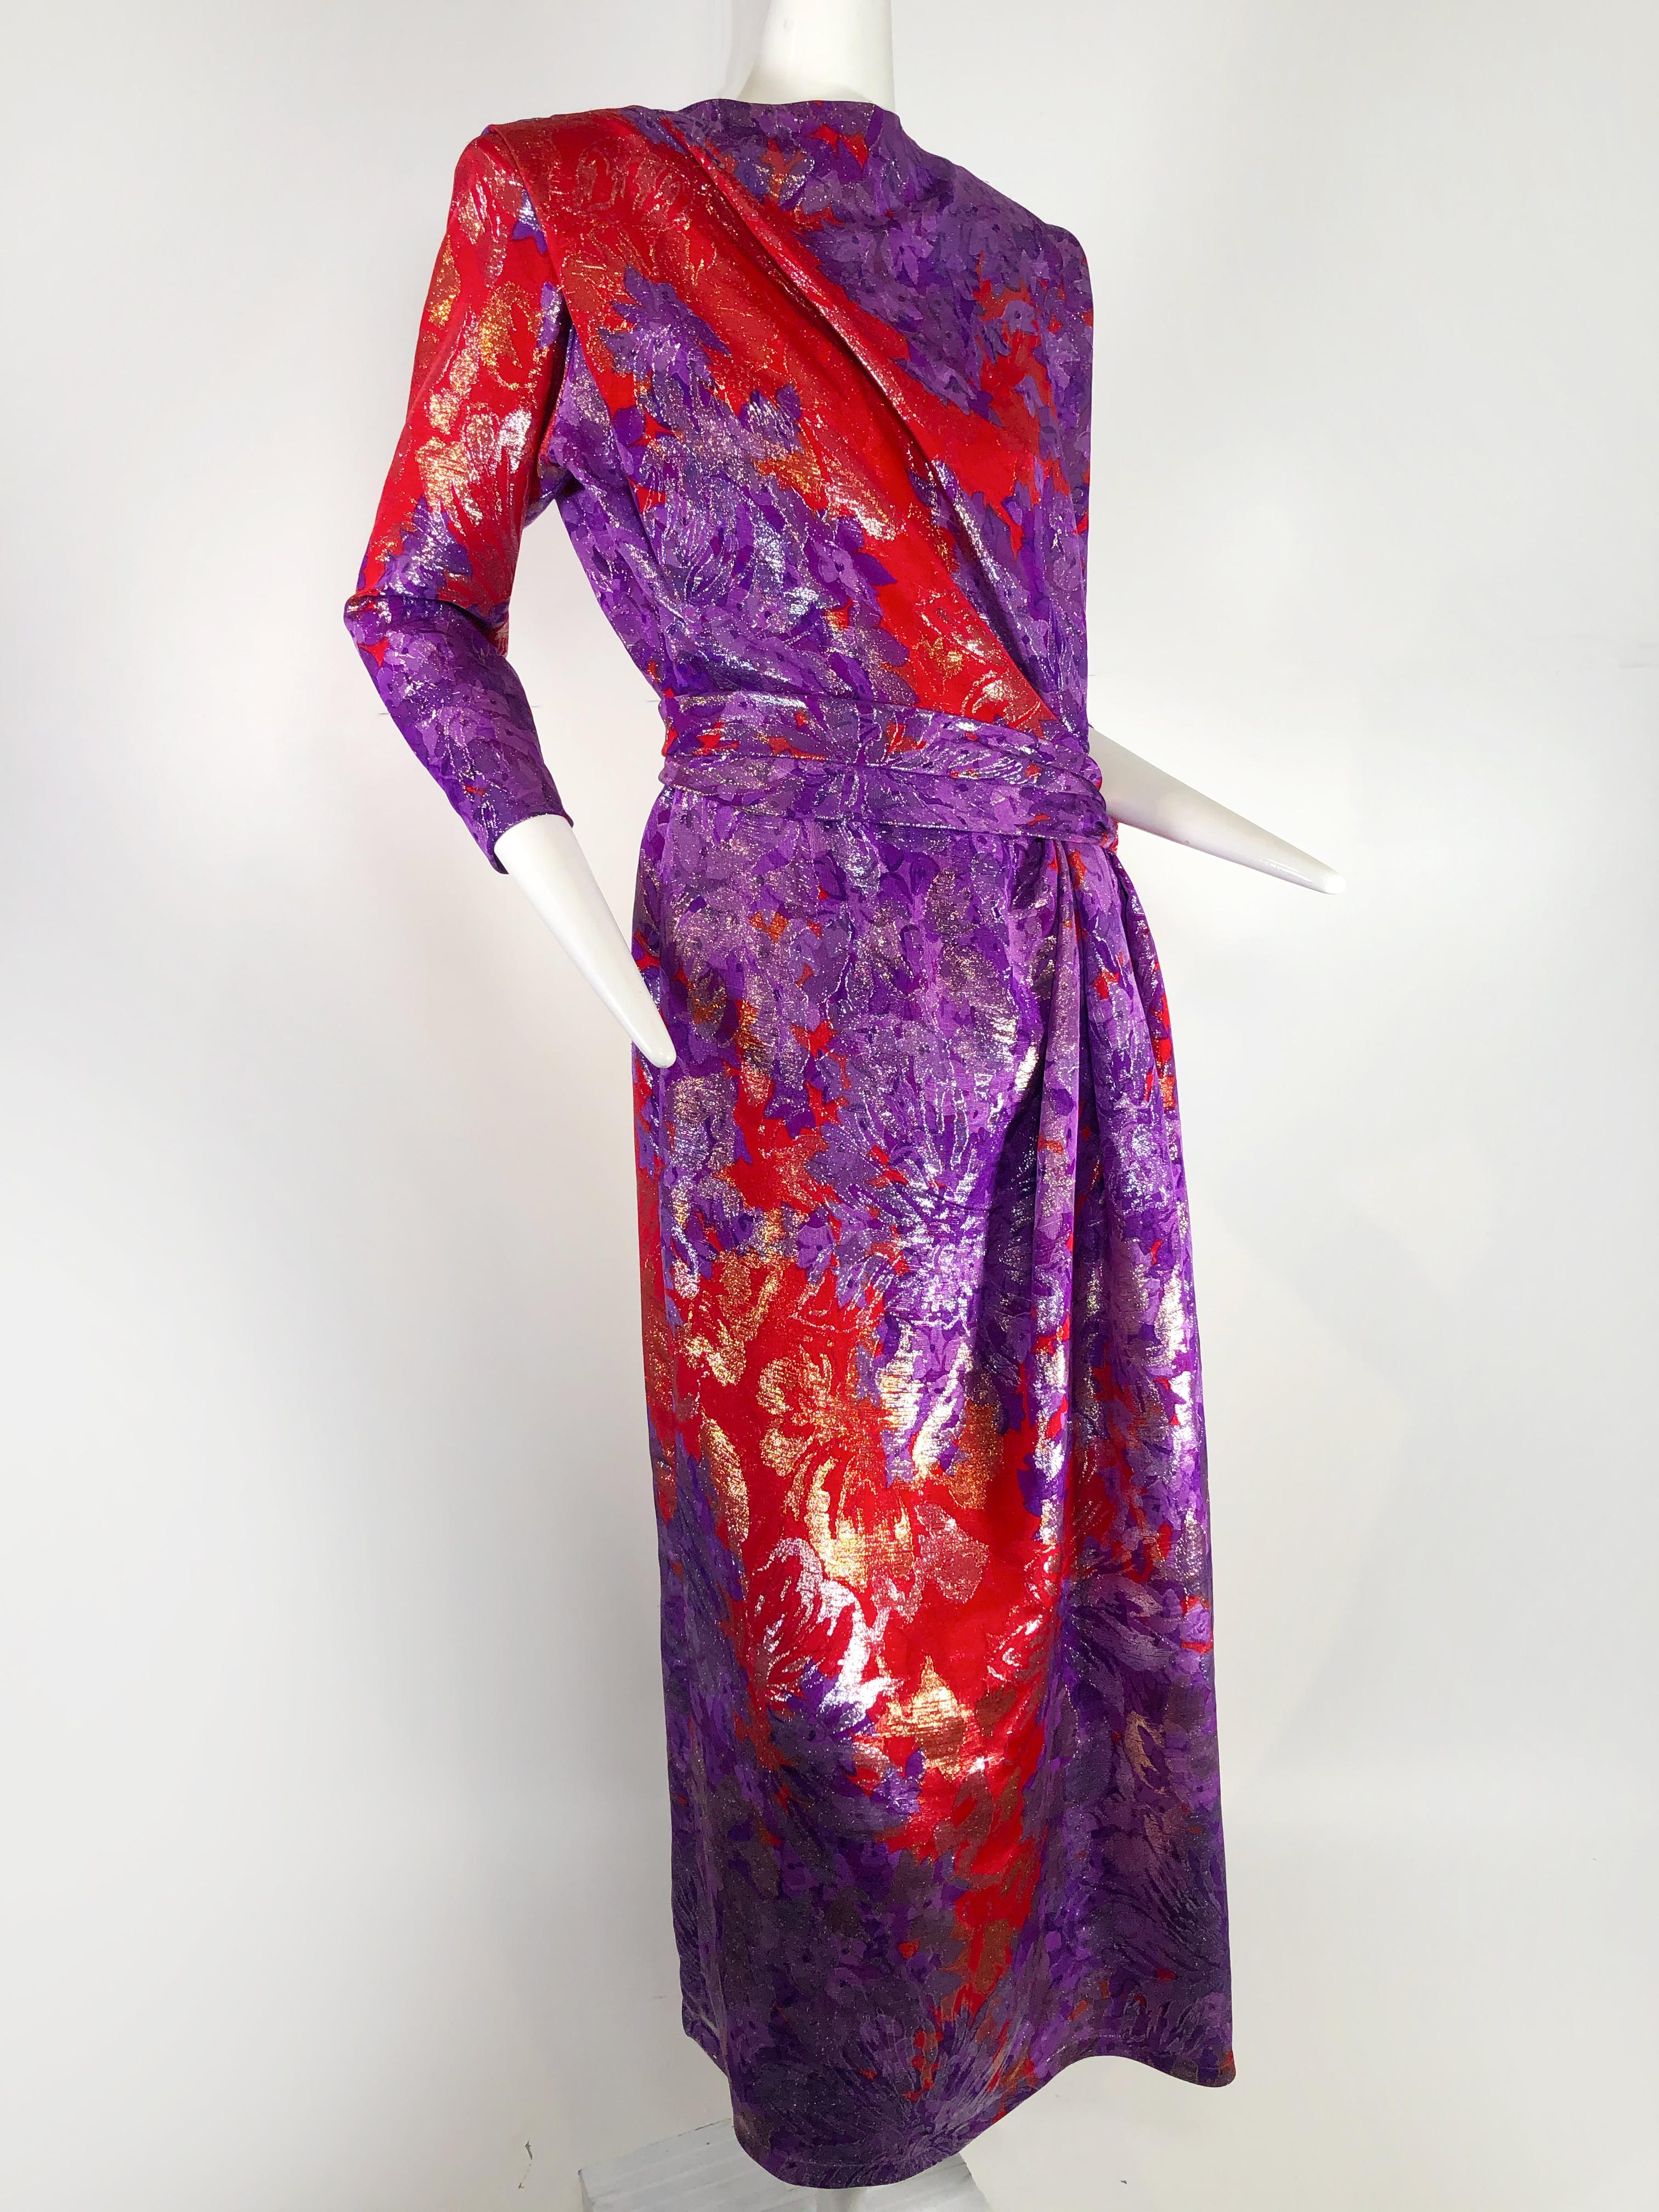 1980s Yves Saint Laurent purple, red and gold floral brocade gown with belt.  Low cut back, side slit. Fully lined.